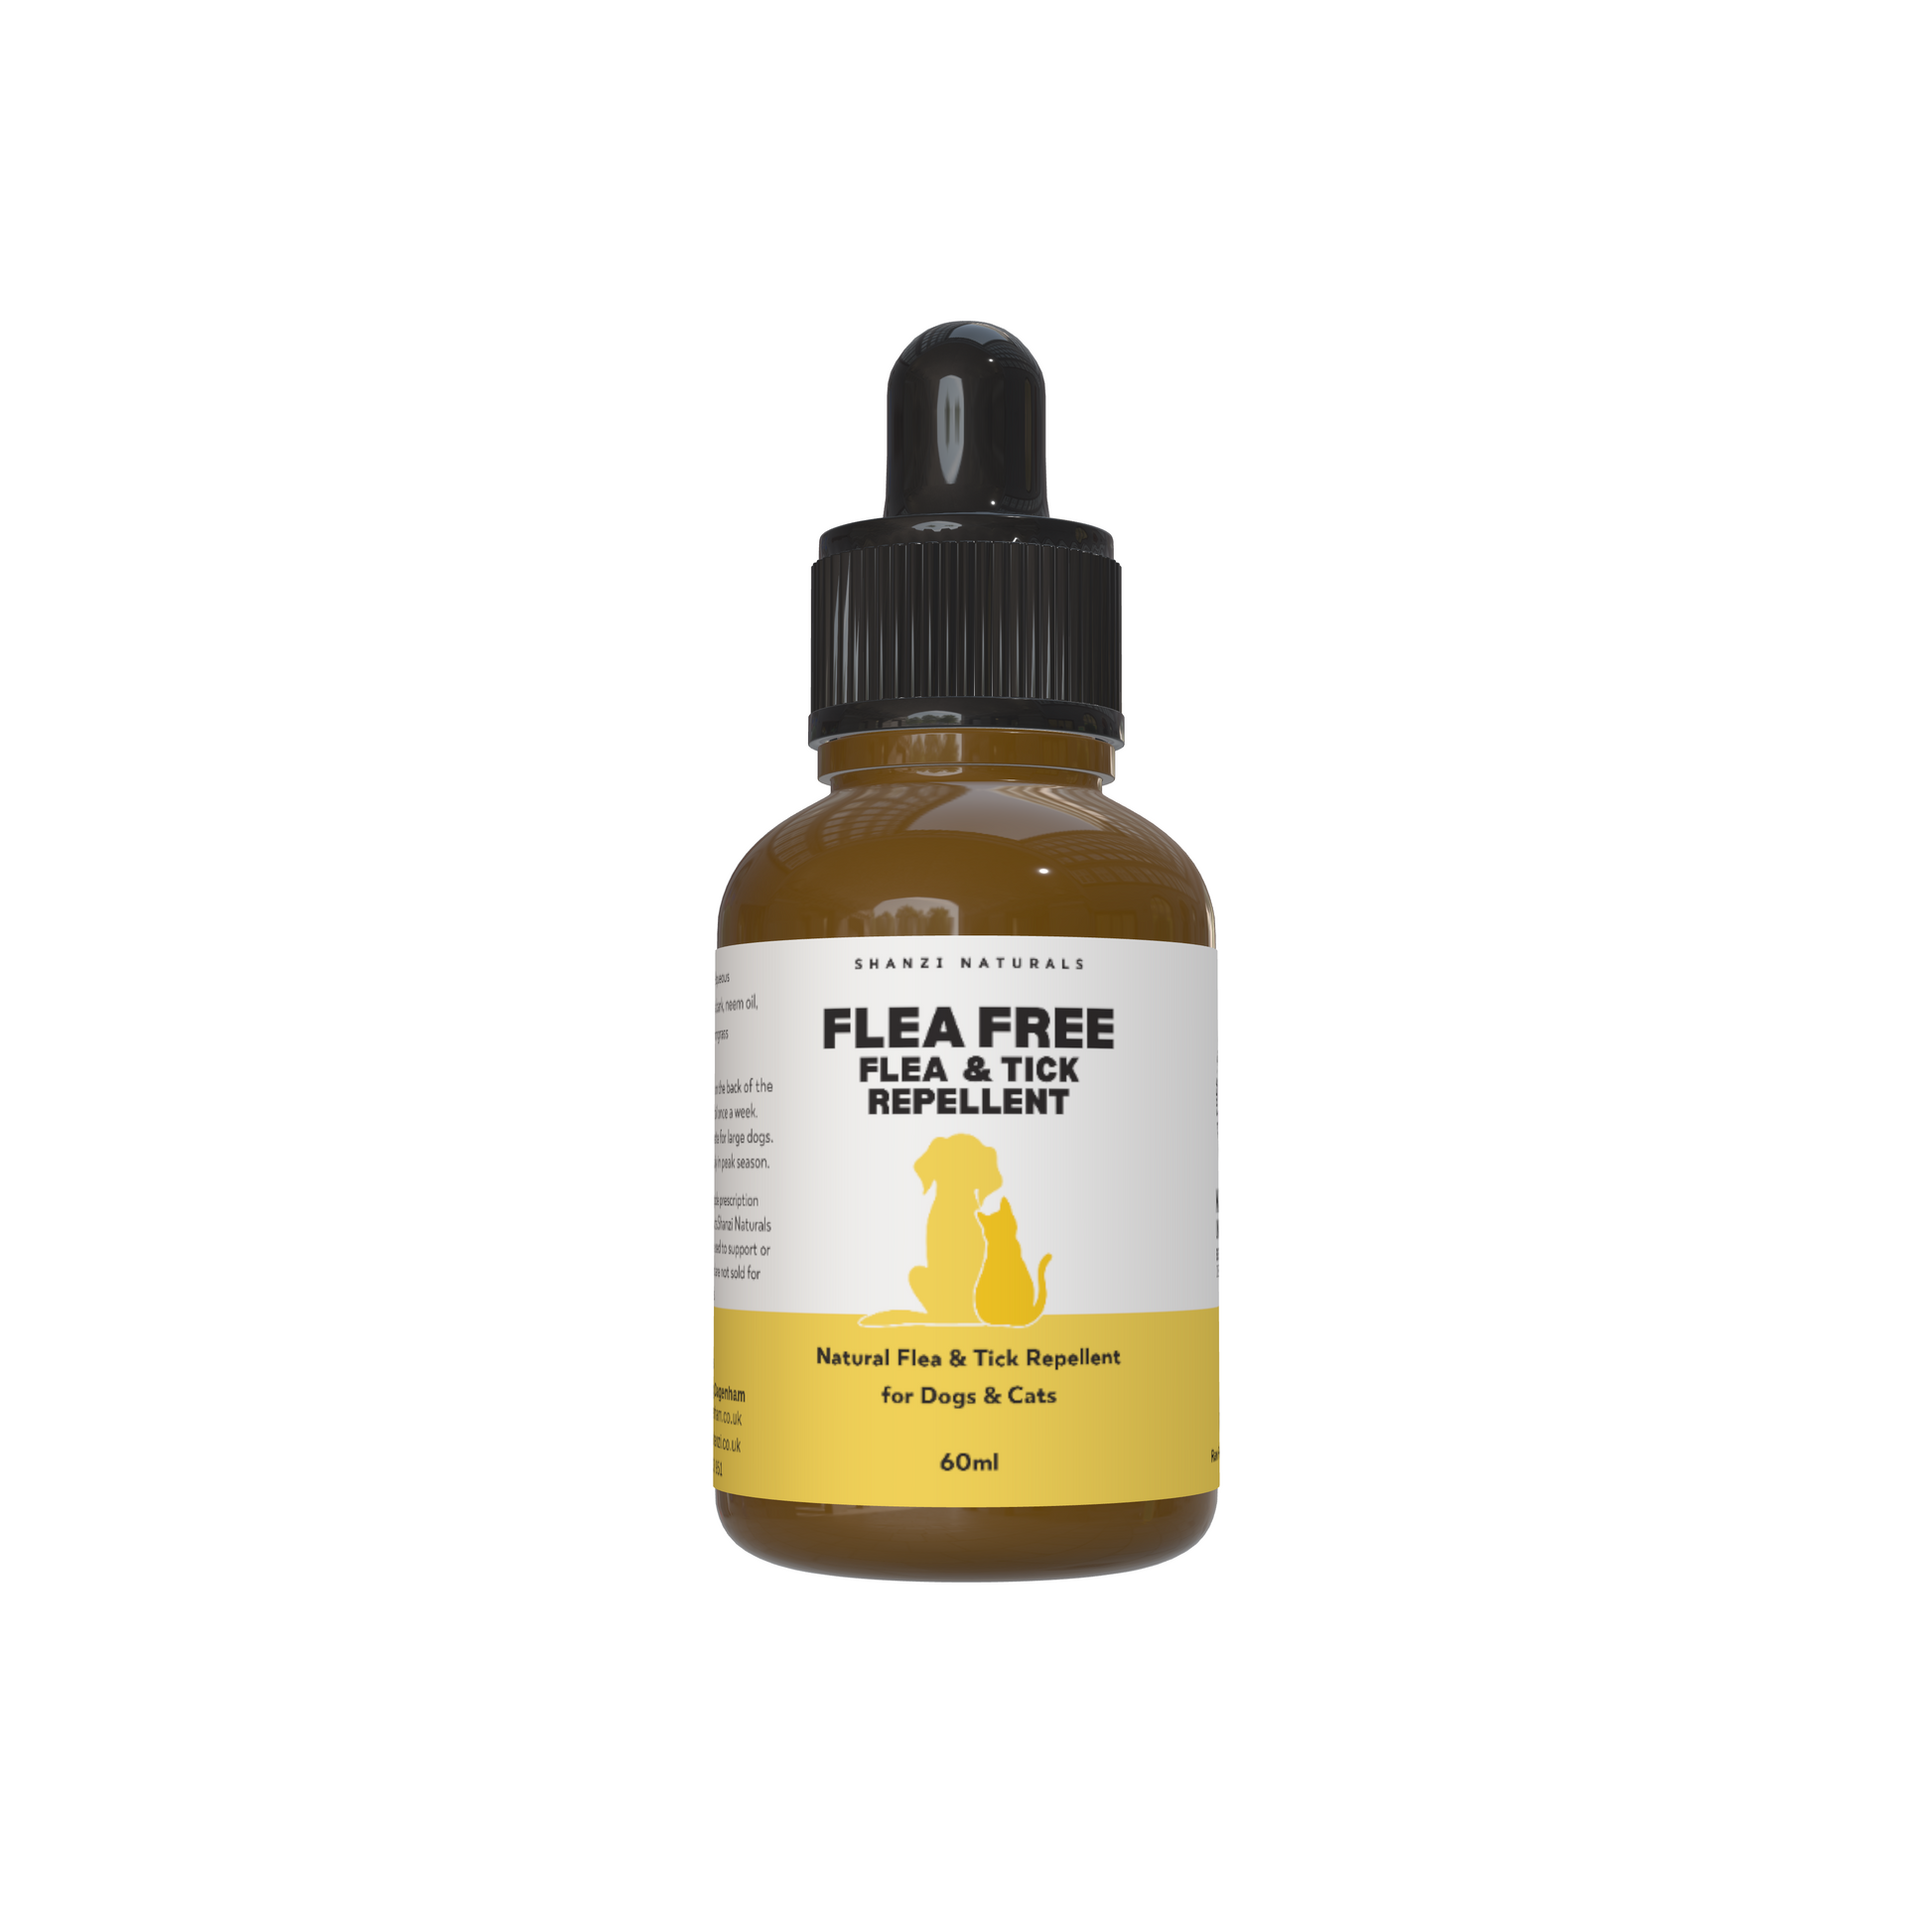 natural herbal flea and tick  spot on for dogs, cats, puppies and kittens. No chemicals. 